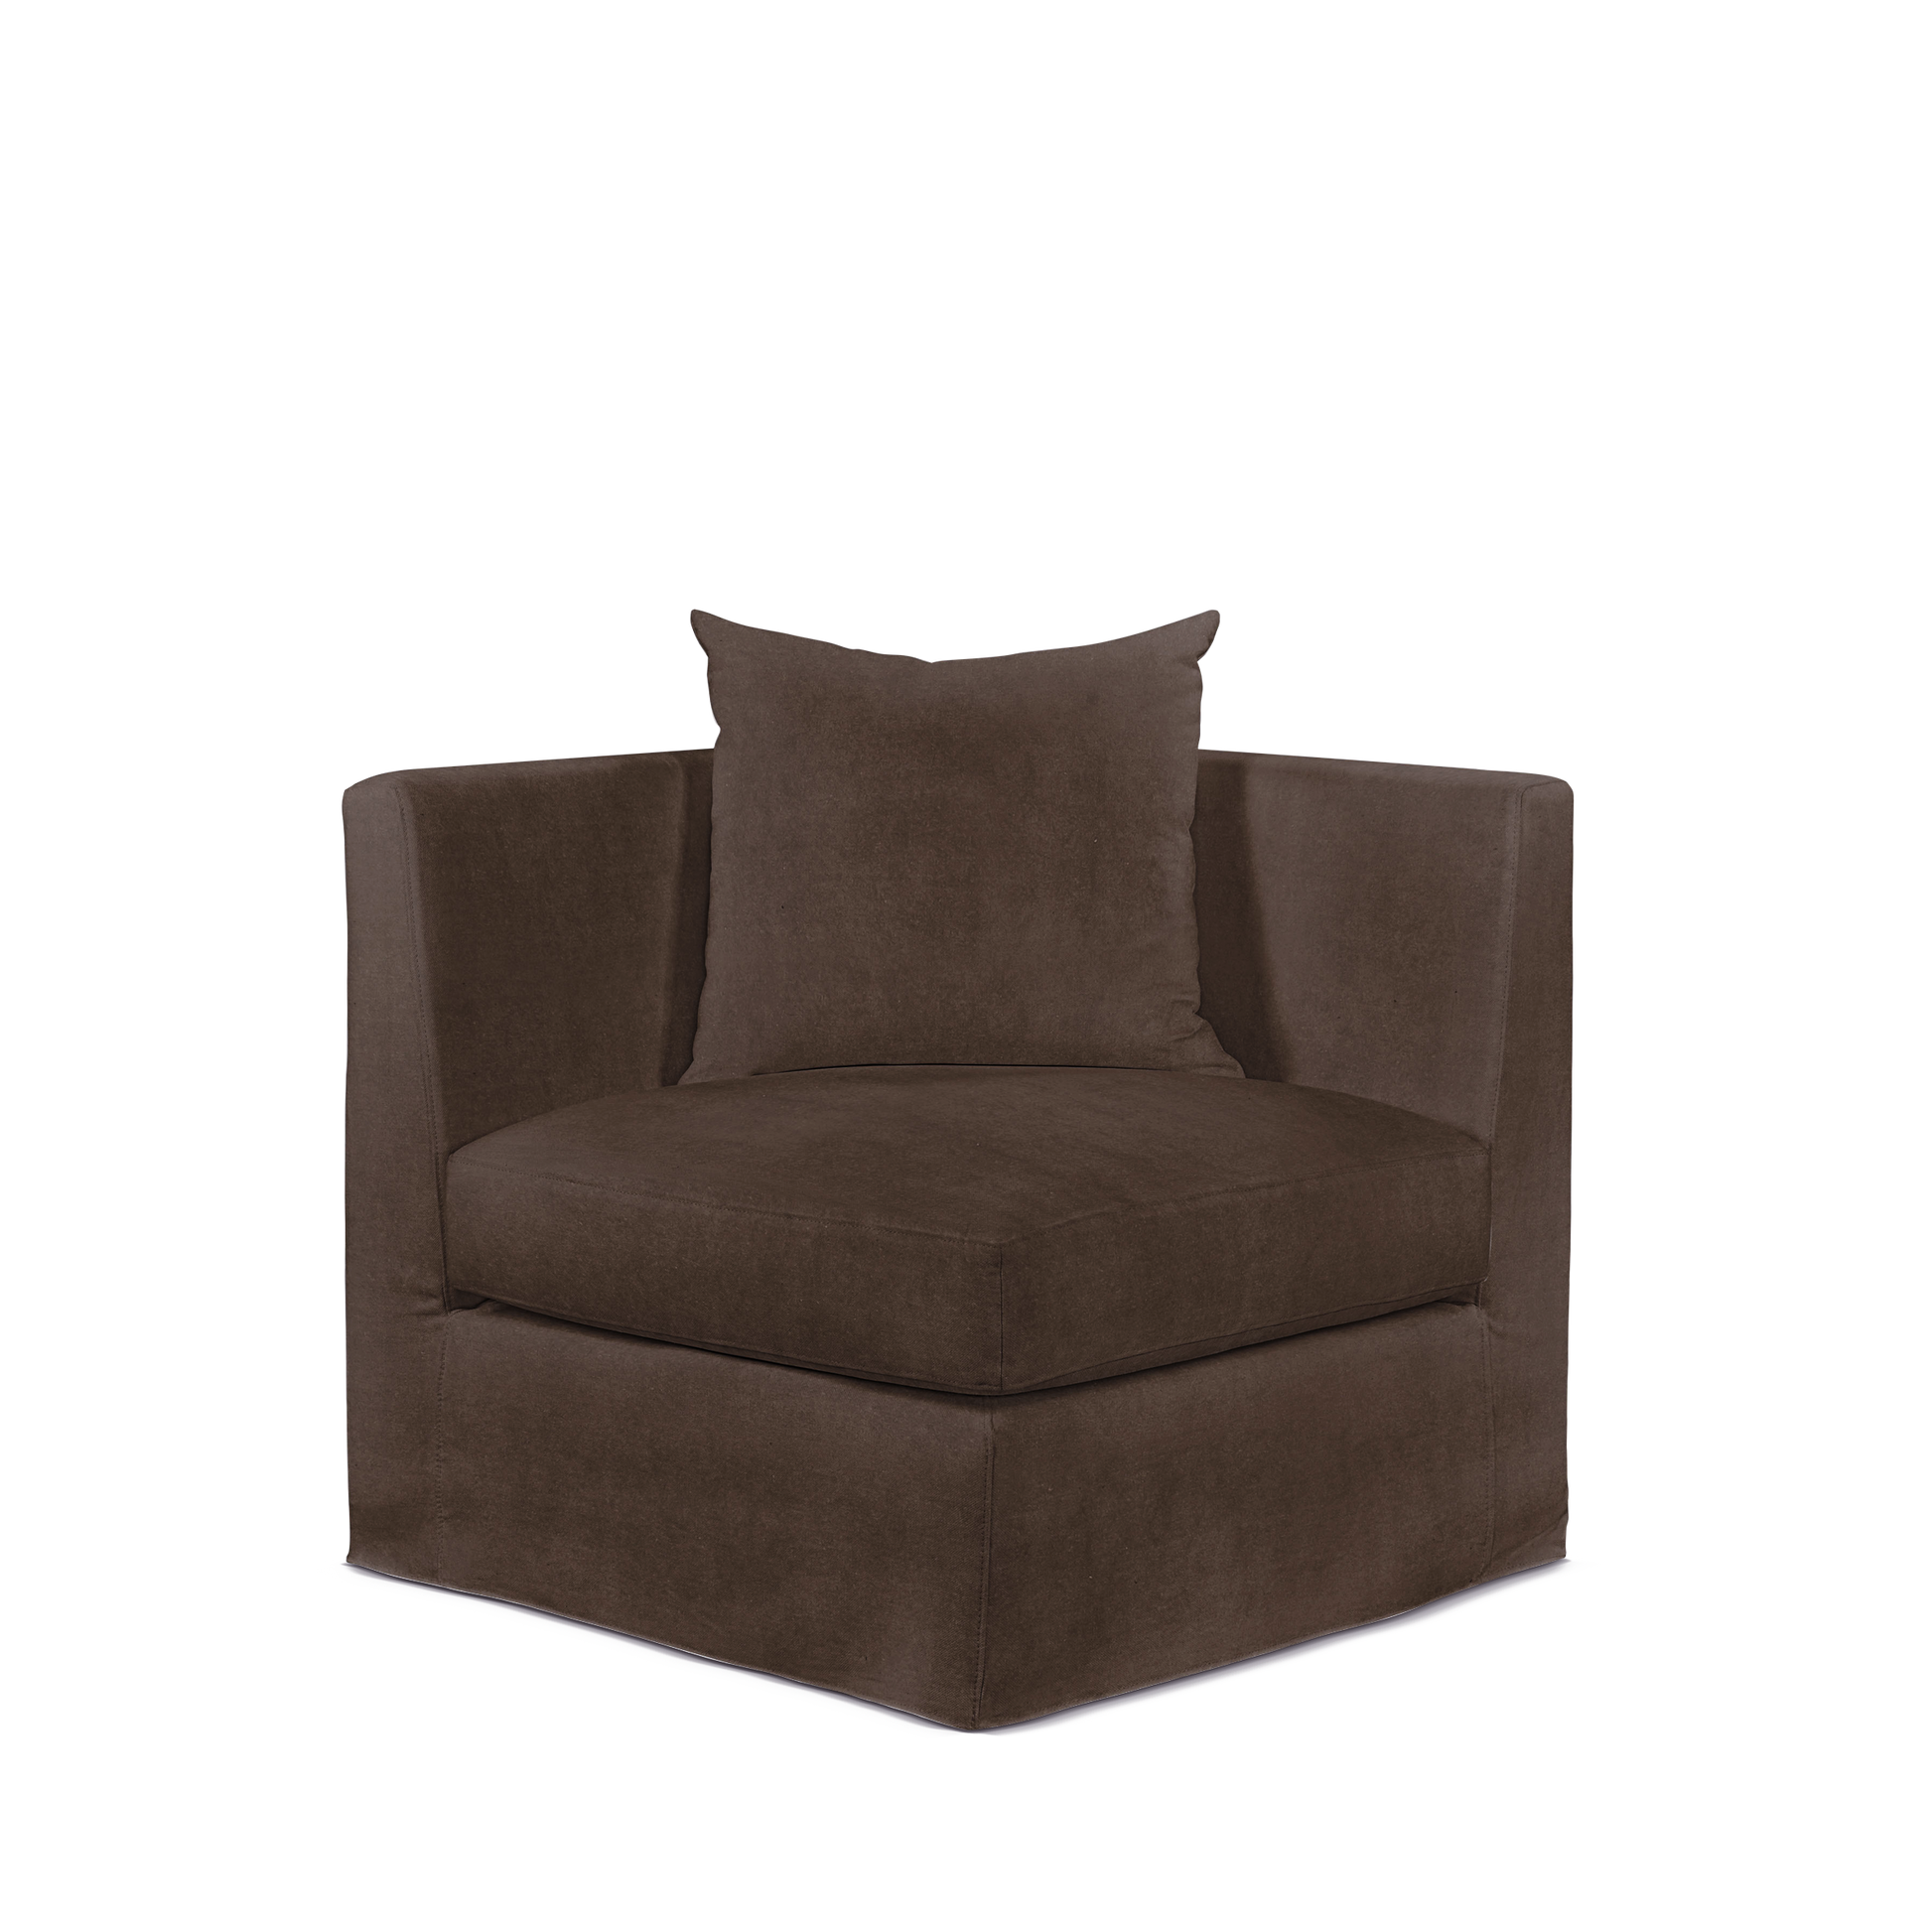 Breathe armchair with suede brown textile